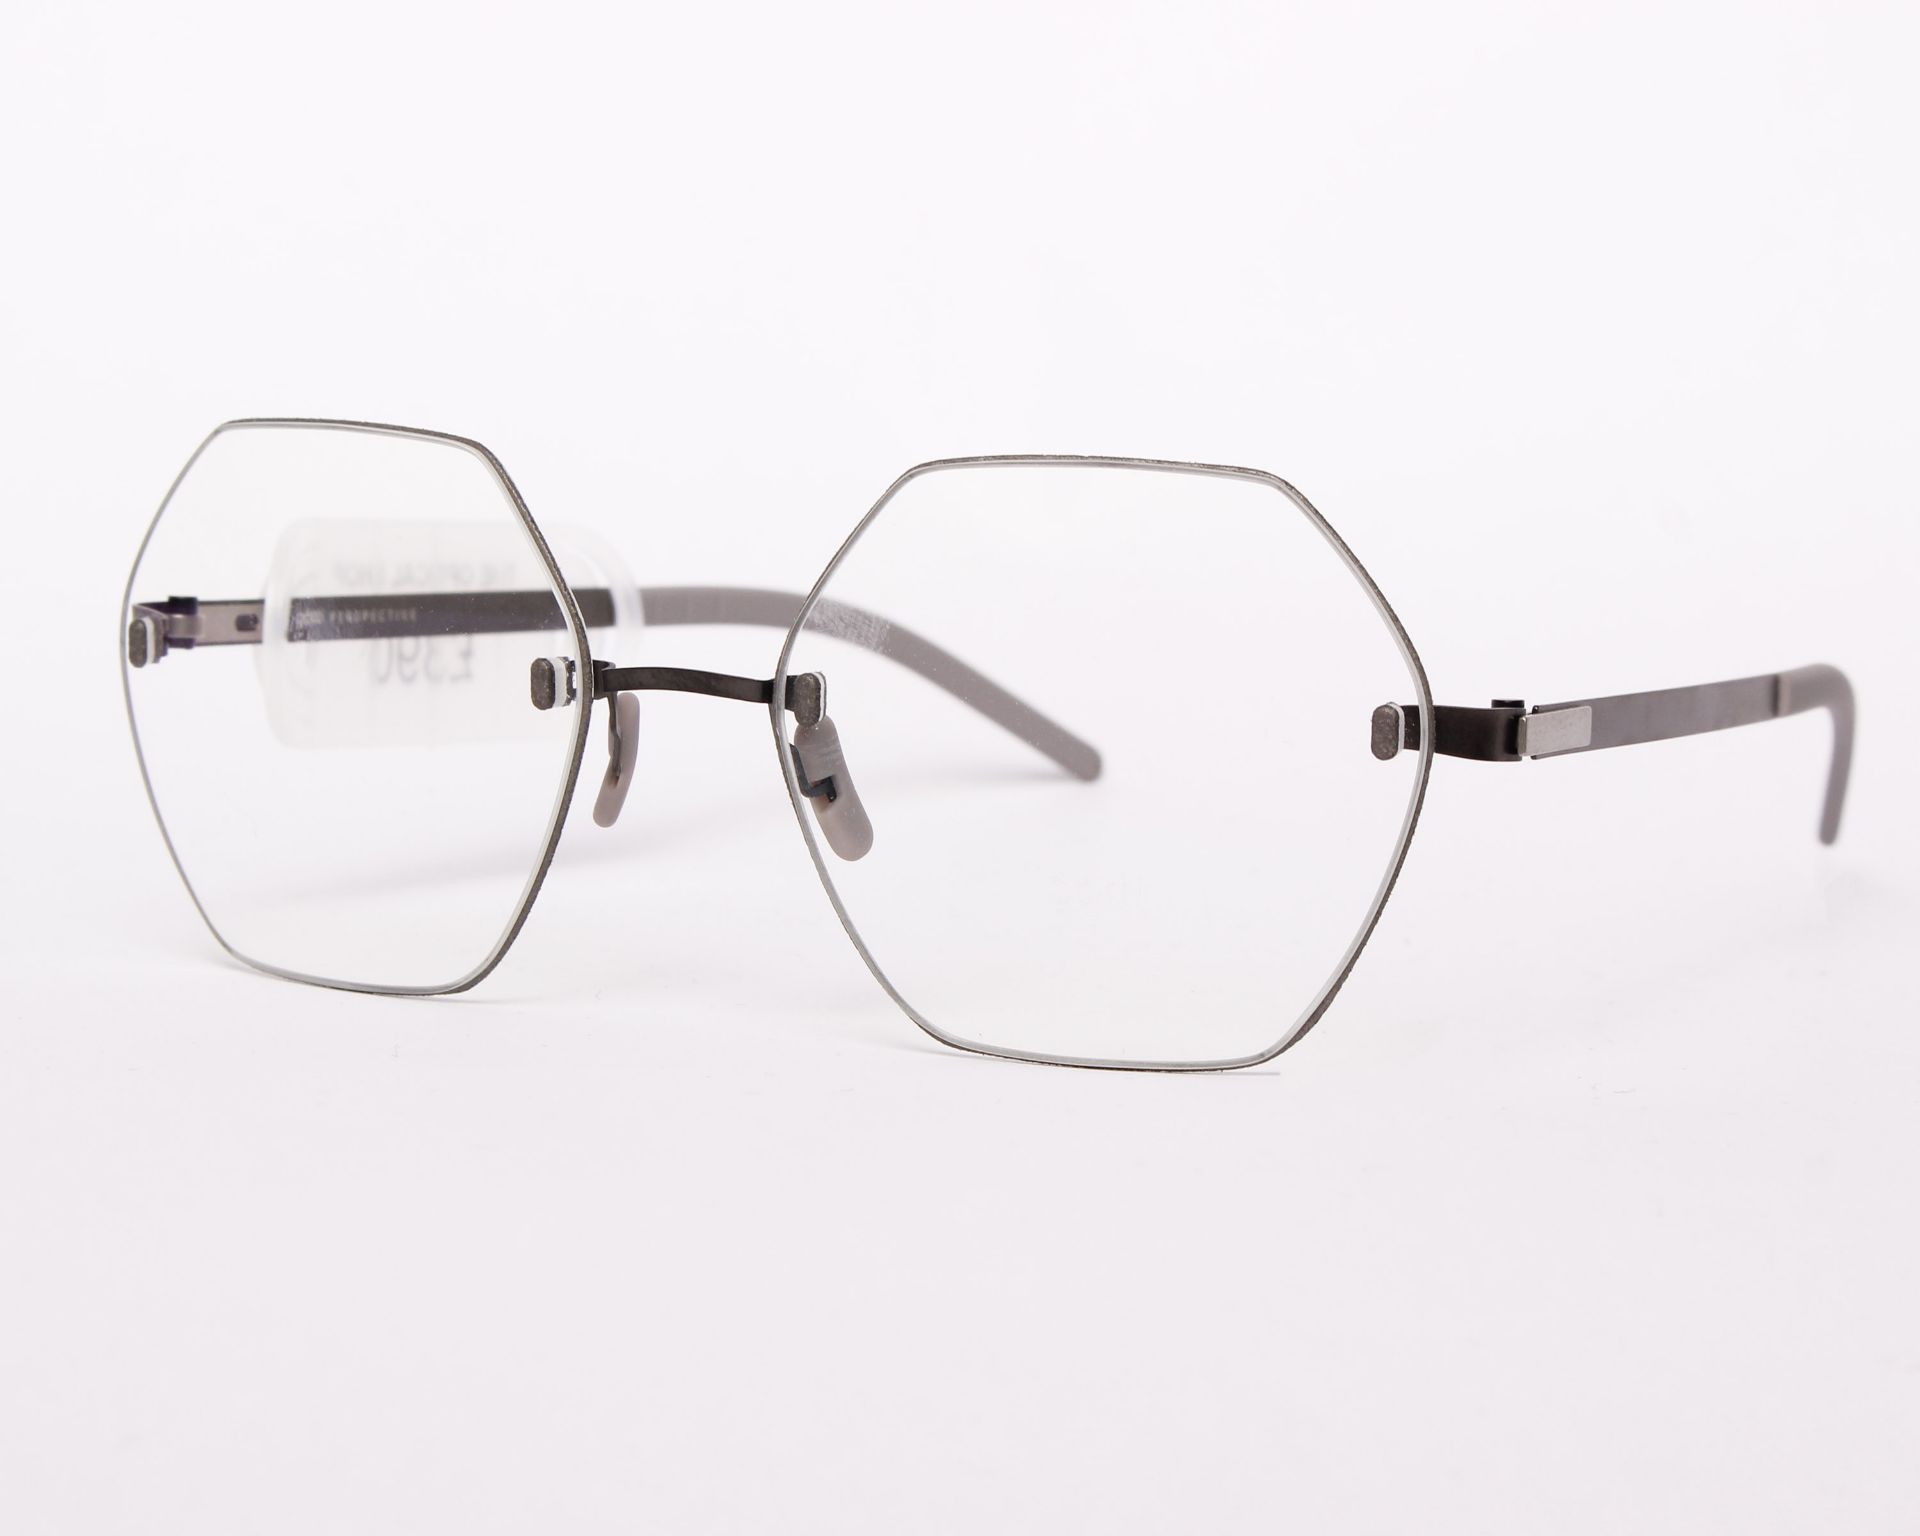 A pair of as new Gotti Perspective glasses frames with clear glass (RRP £390). - Image 2 of 3